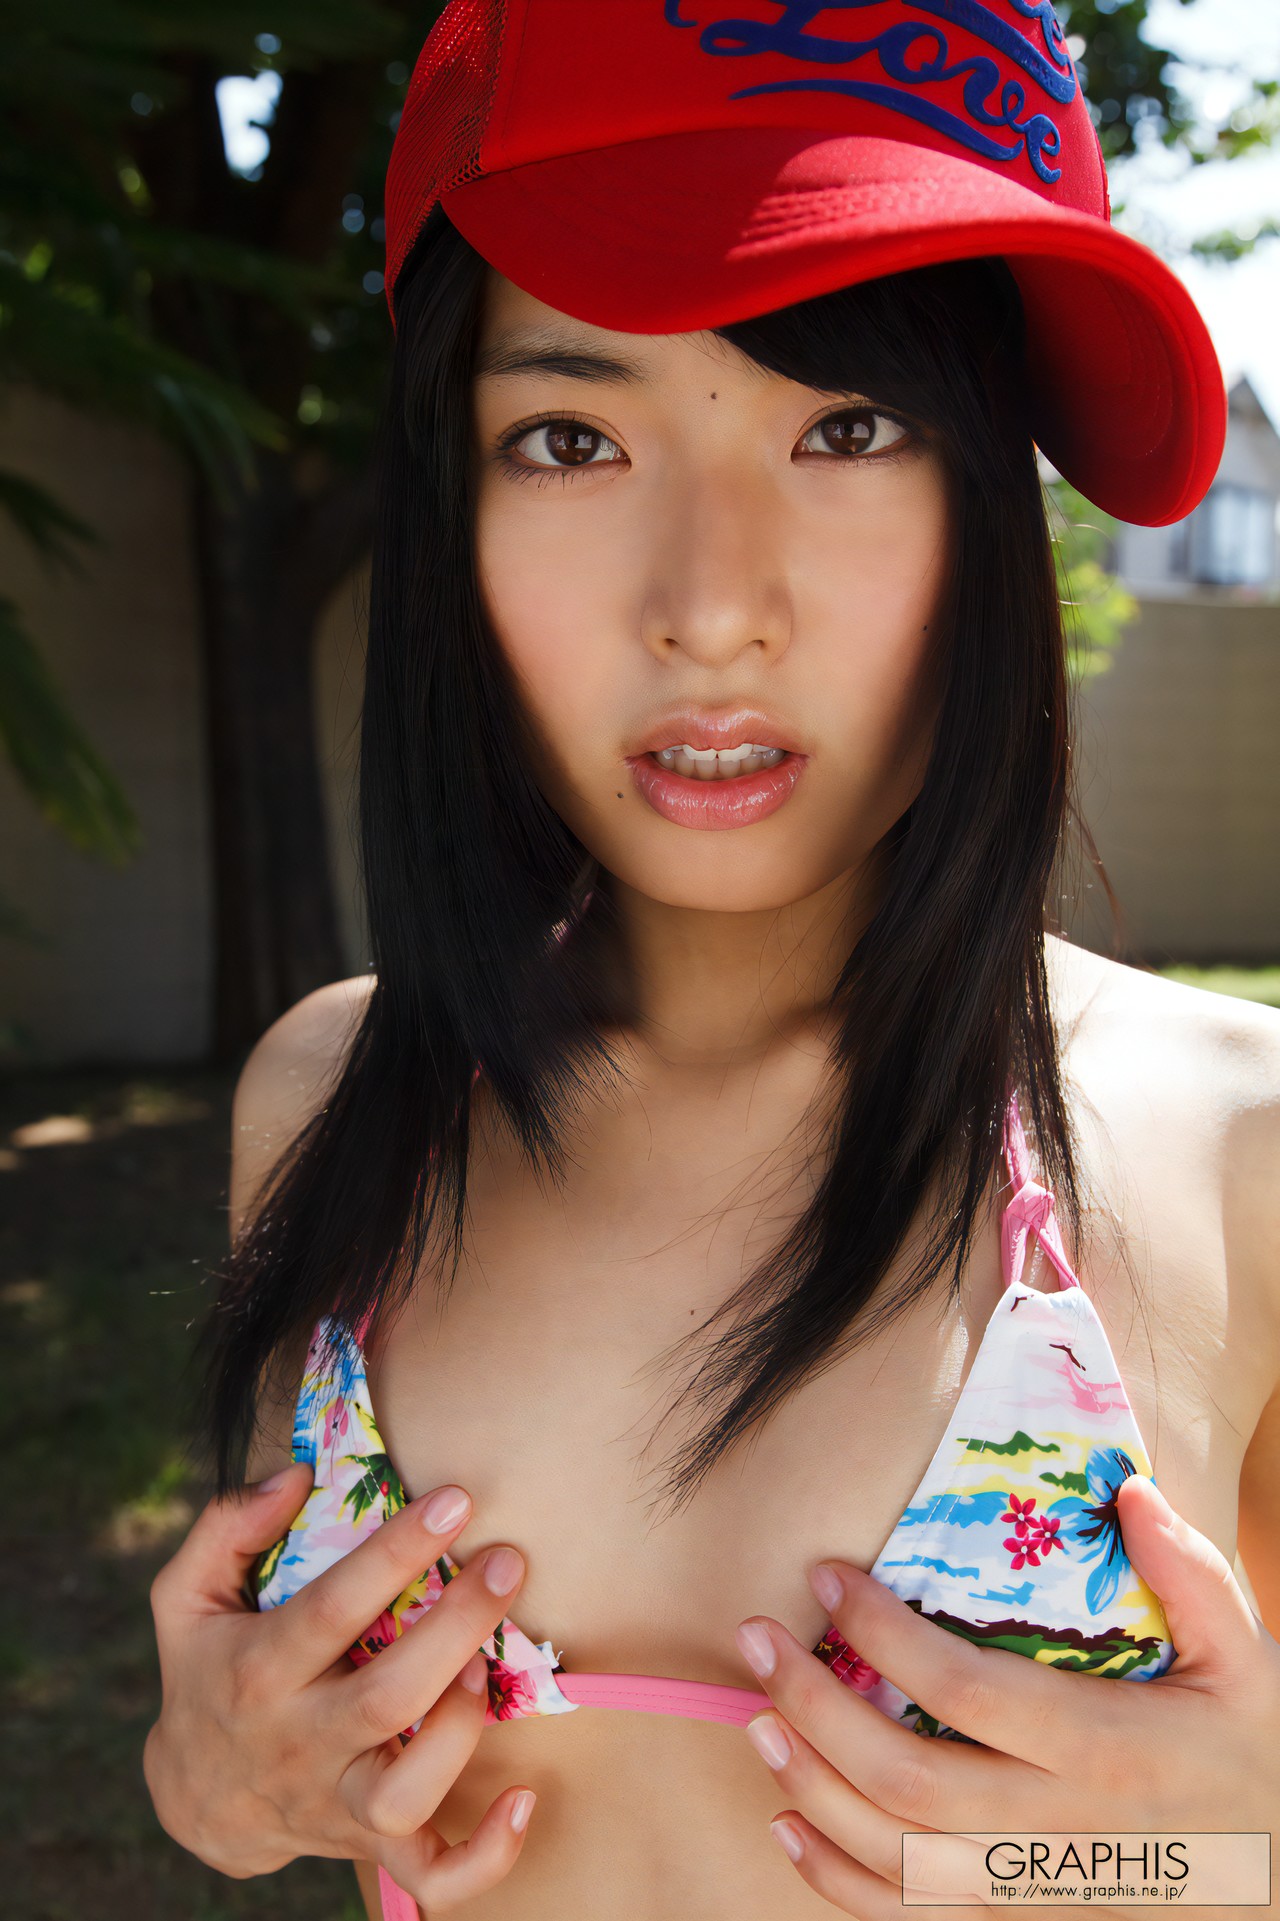 Kana Yume 由愛可奈, Graphis Special Contents [Further Growth] Vol.01